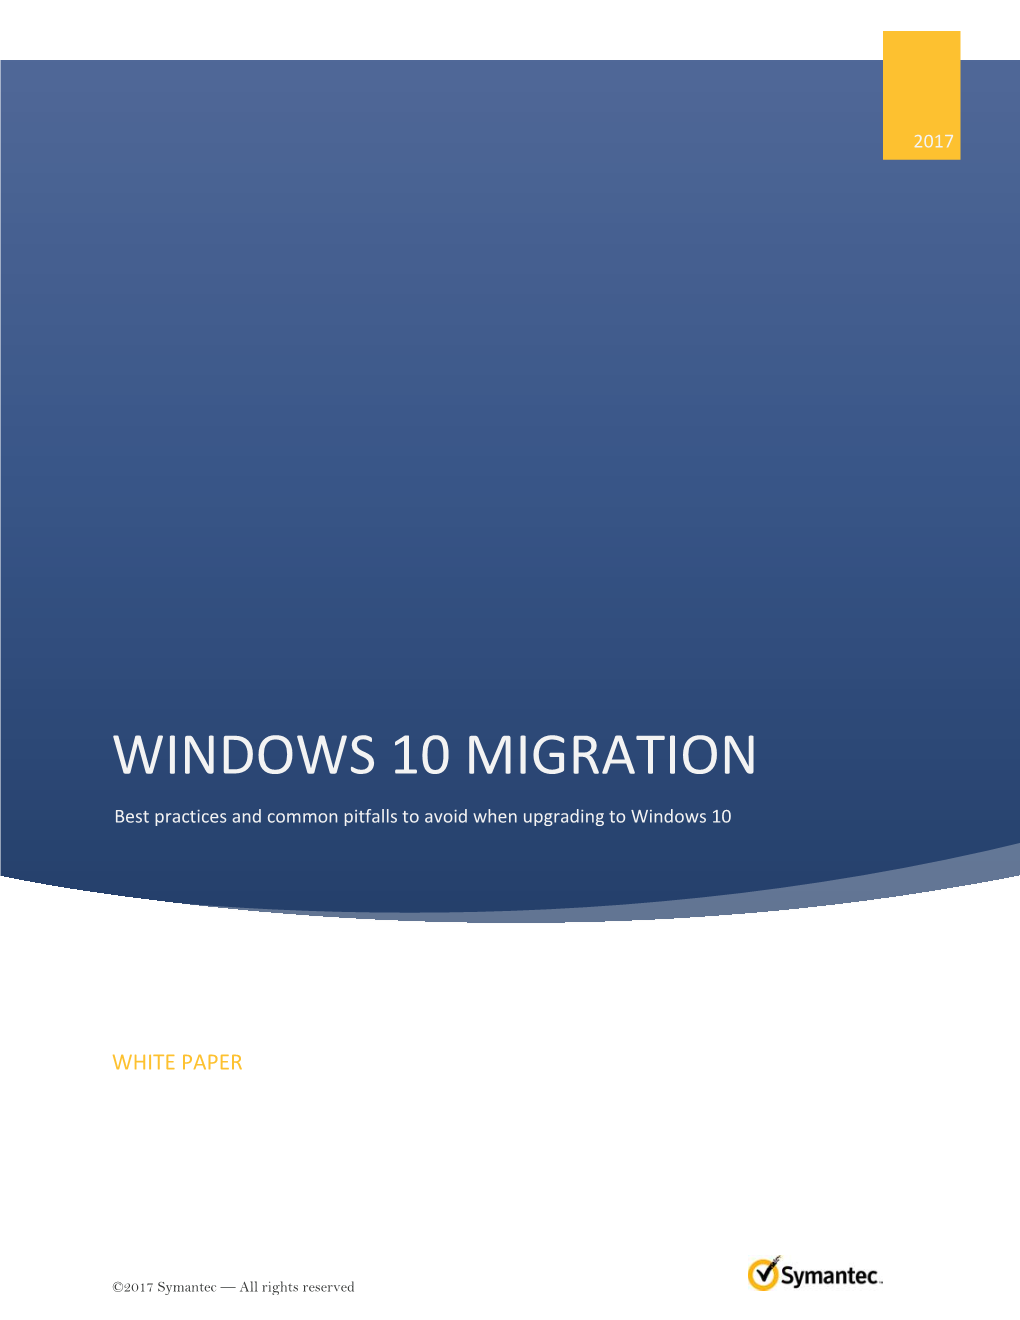 WINDOWS 10 MIGRATION Best Practices and Common Pitfalls to Avoid When Upgrading to Windows 10